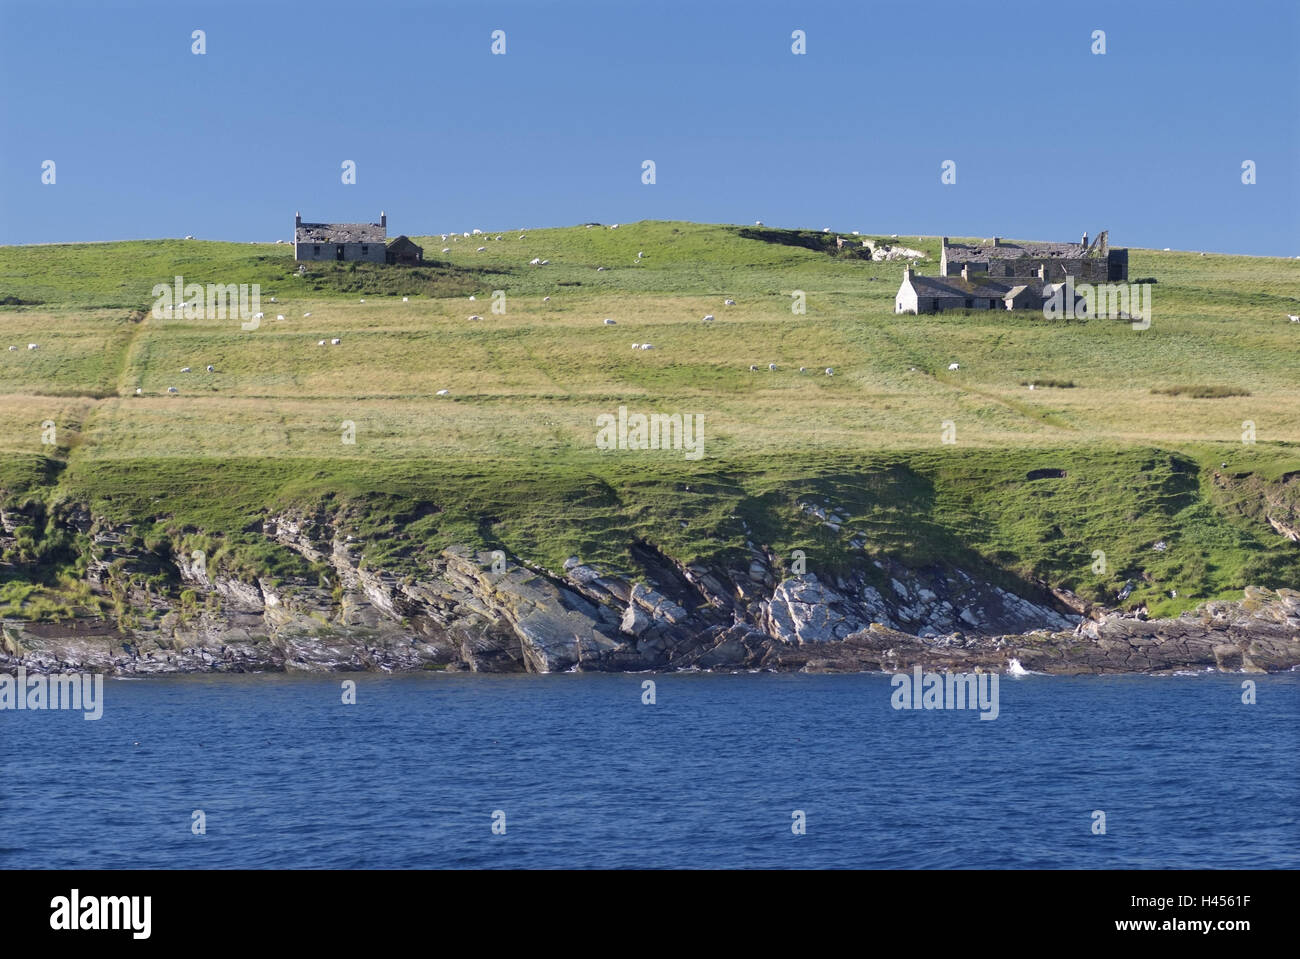 Great Britain, Scotland, Orkney Islands, island South Ronaldsay, landscape, coast, houses, Orkney, coastal landscape, meadows, fields, agriculture, sea, sky, clouds, sunny, residential houses, remote, isolated, Stock Photo